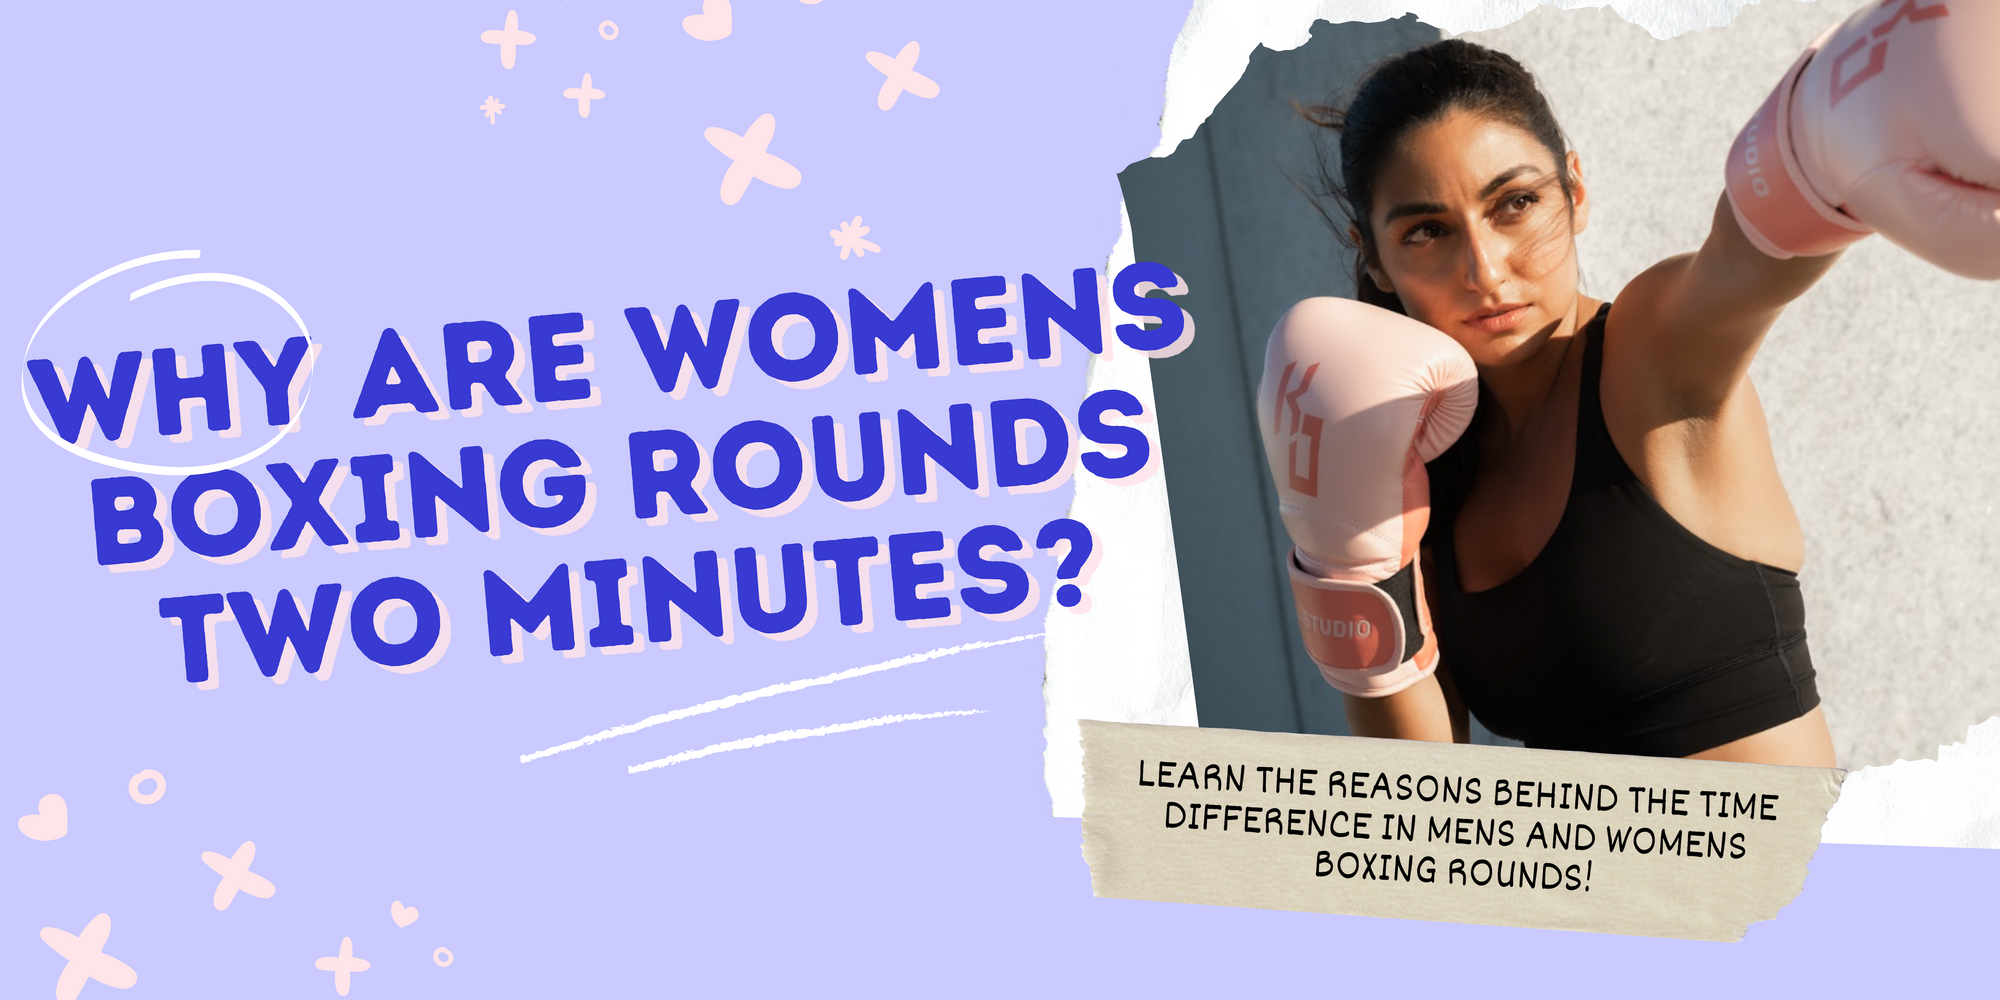 Why are women's rounds are only 2 minutes? Is it sexism or safety?